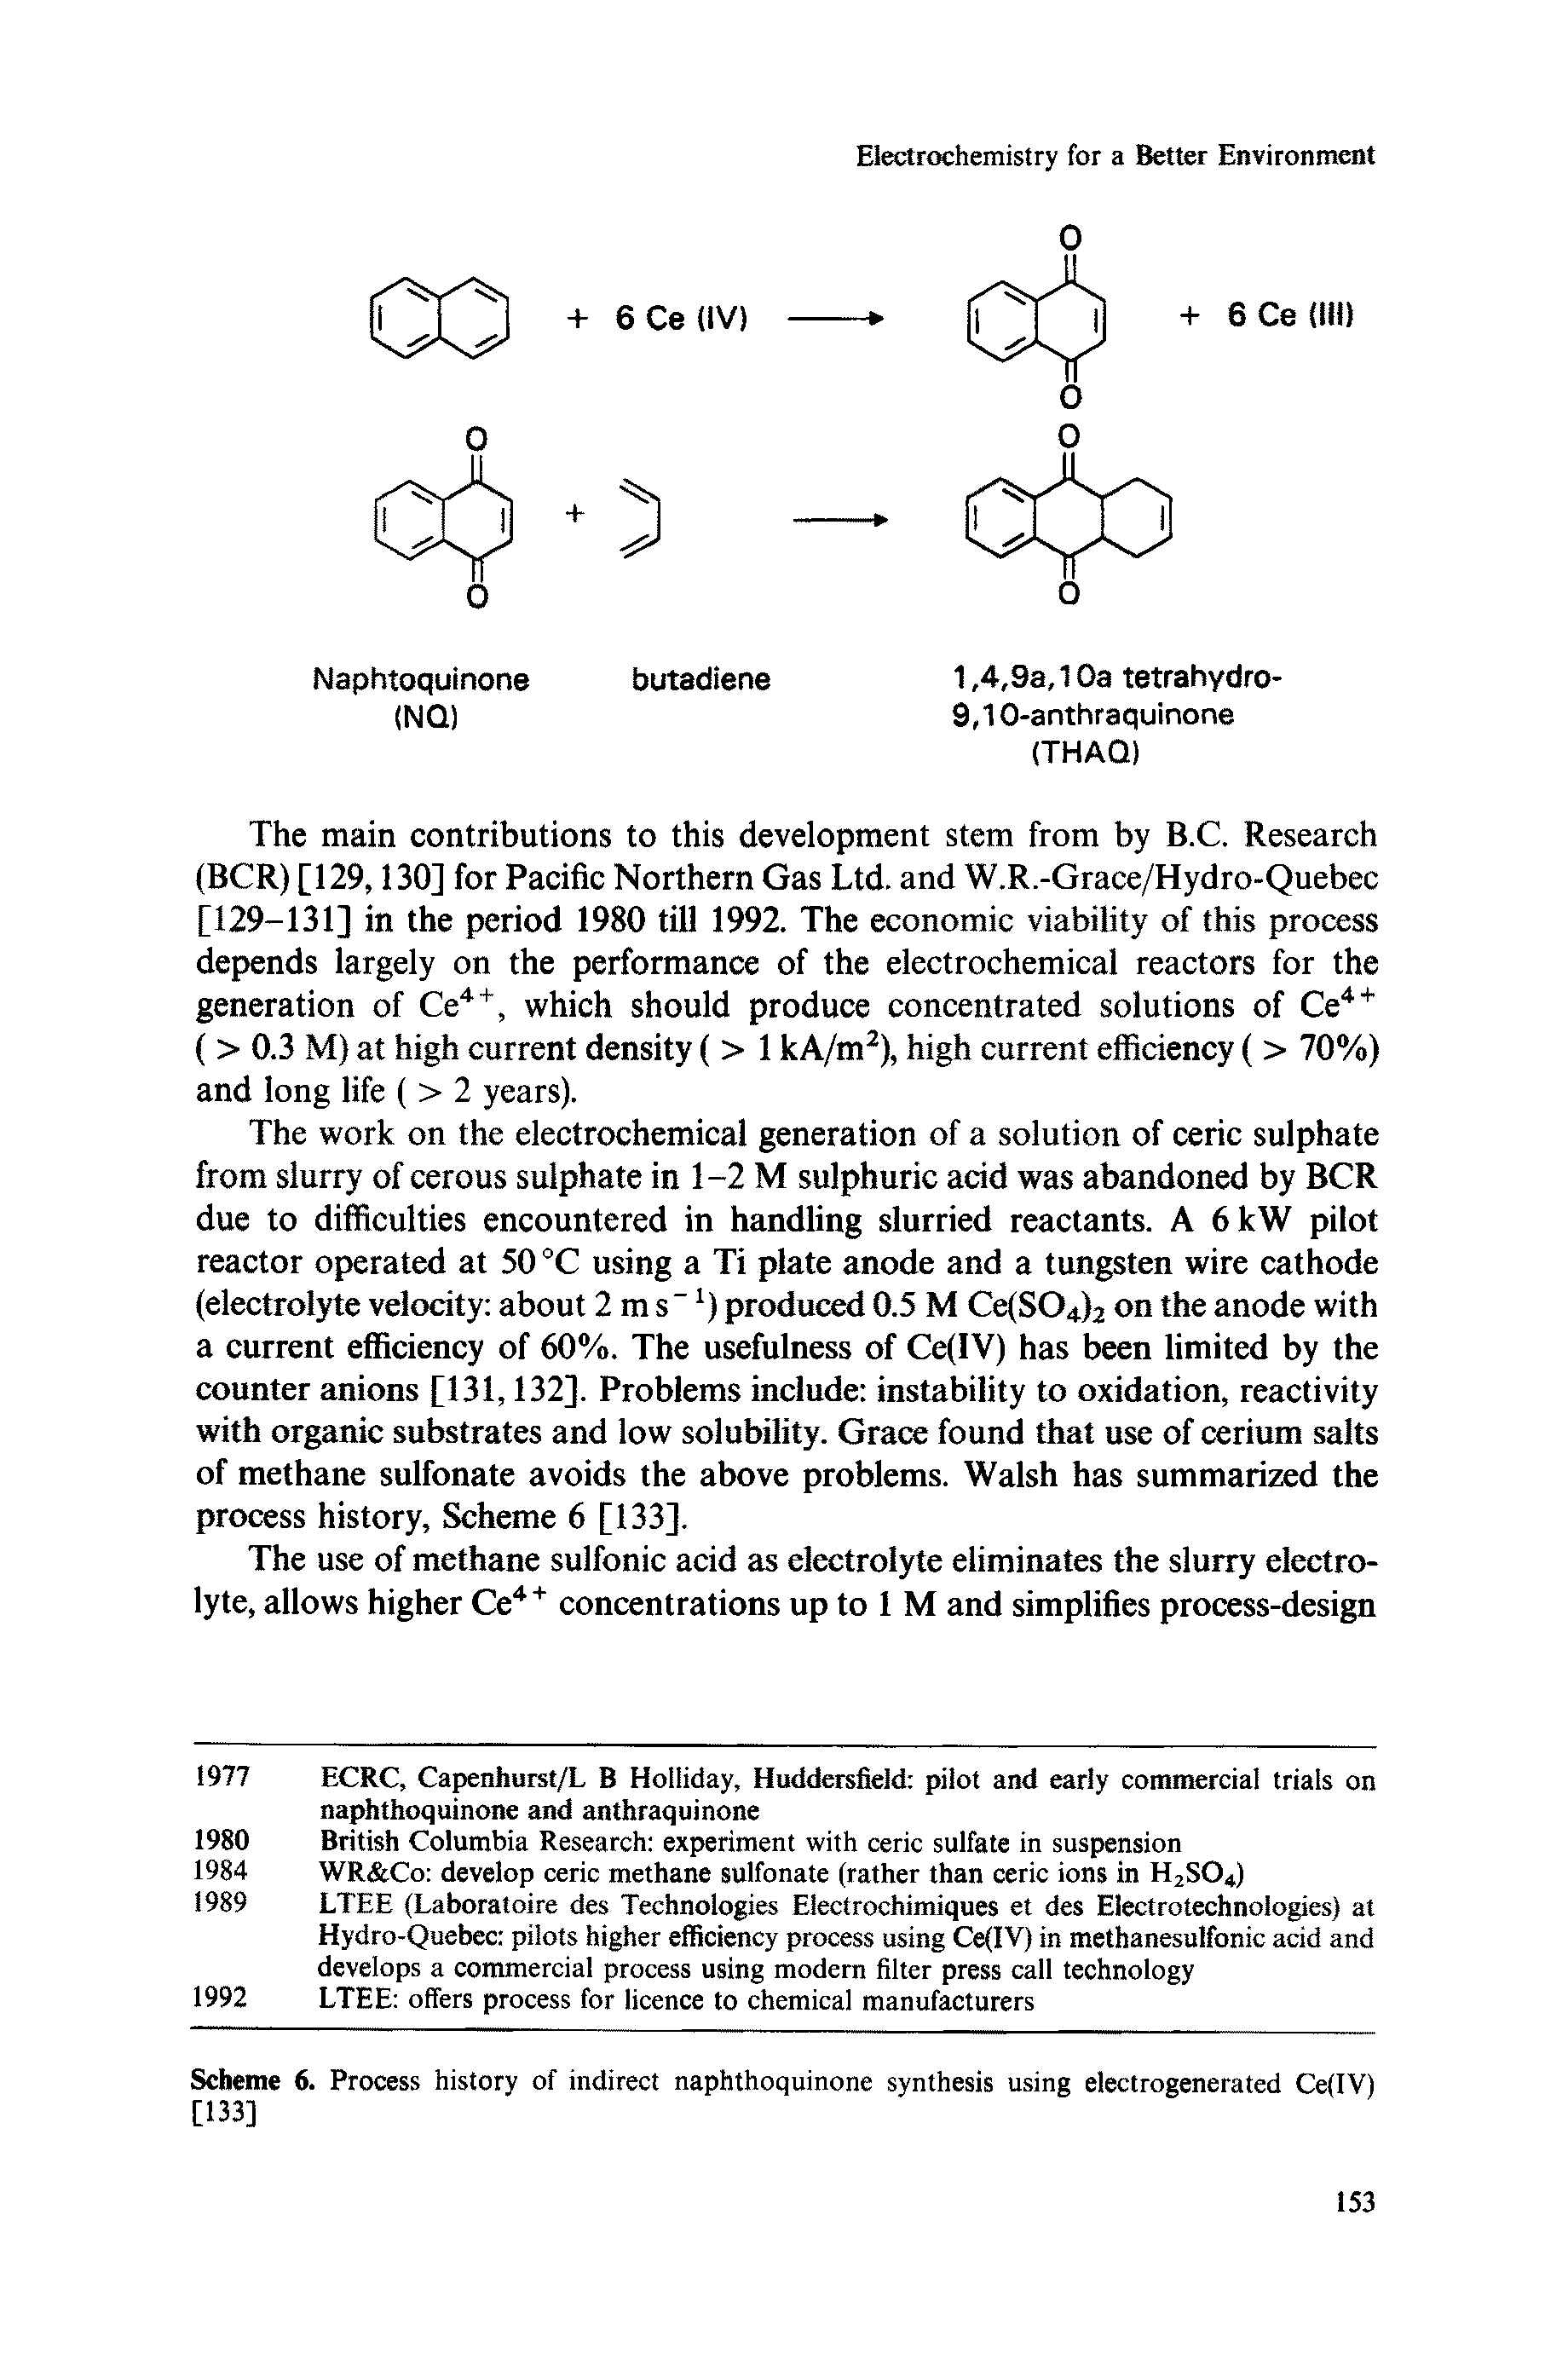 Scheme 6. Process history of indirect naphthoquinone synthesis using electrogenerated Ce(IV) [133]...